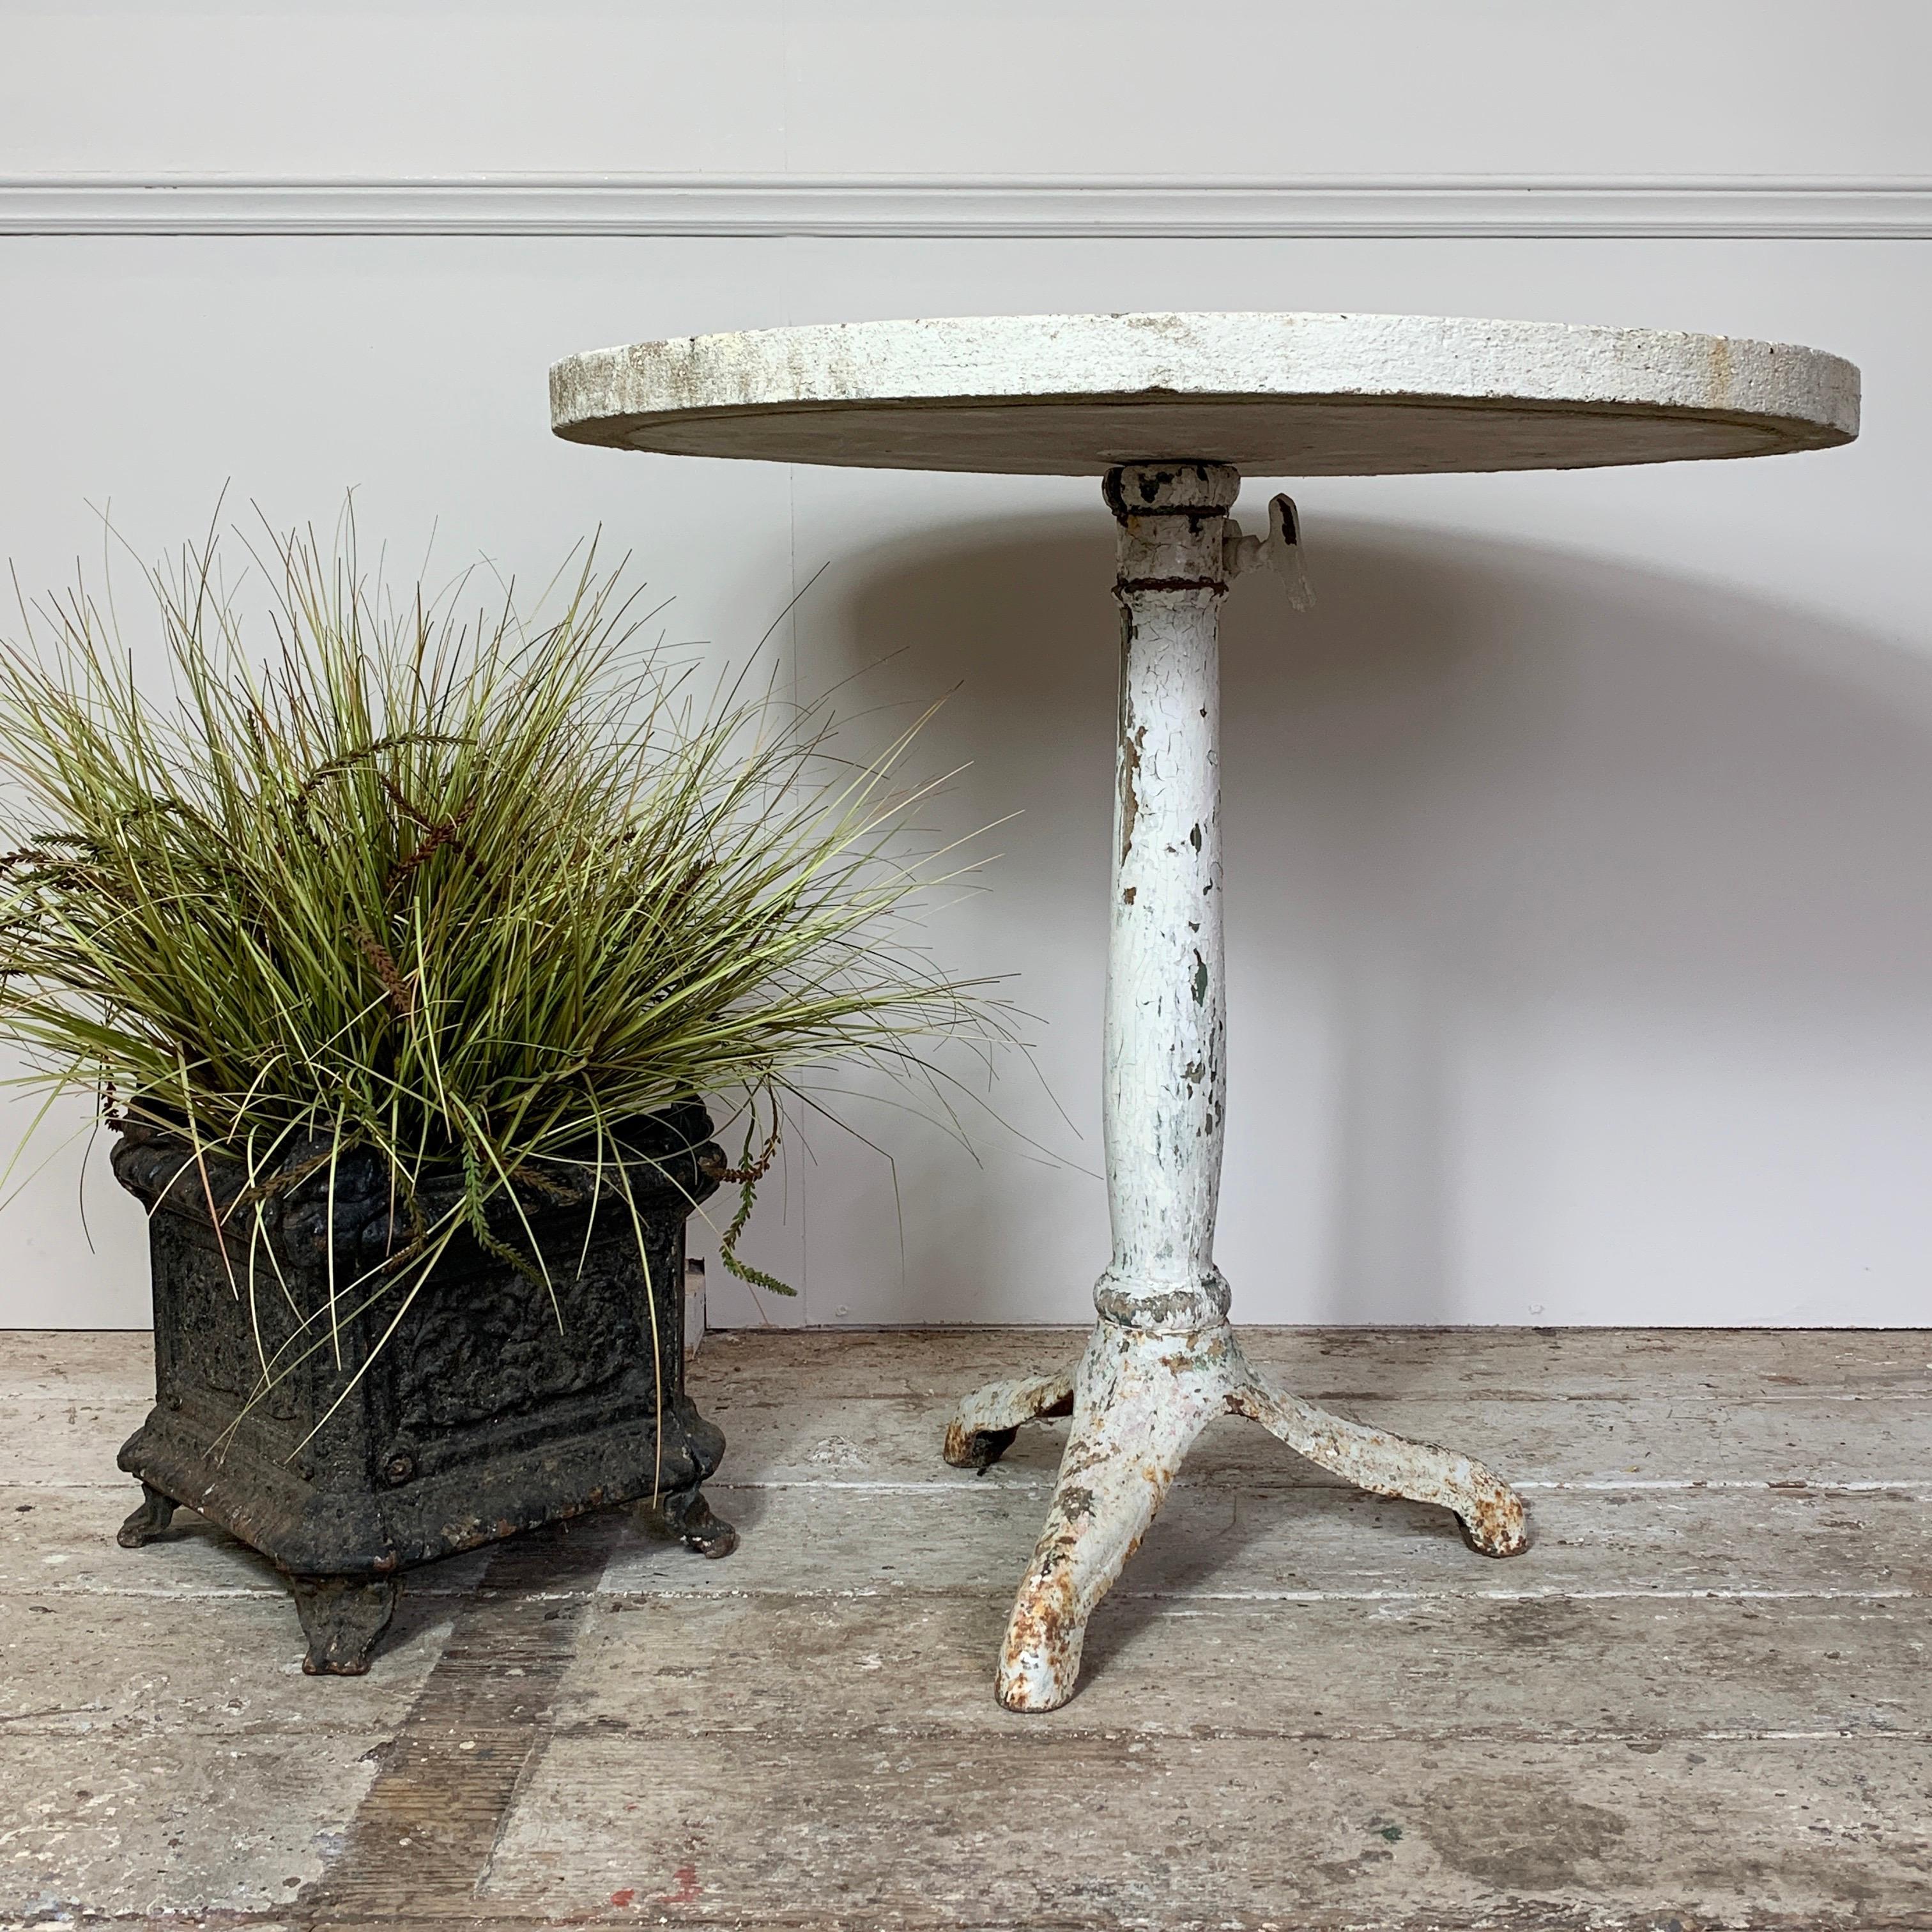 Early 20th Century, Estate Made French Garden Table. Cast Iron Foot, Wooden Pedestal And Composite Stone Table Top. The Top Can Be Removed From The Pedestal And Is Held In Place With The Large Metal Twist Key Underneath. 70Cm Height, 72Cm Width,